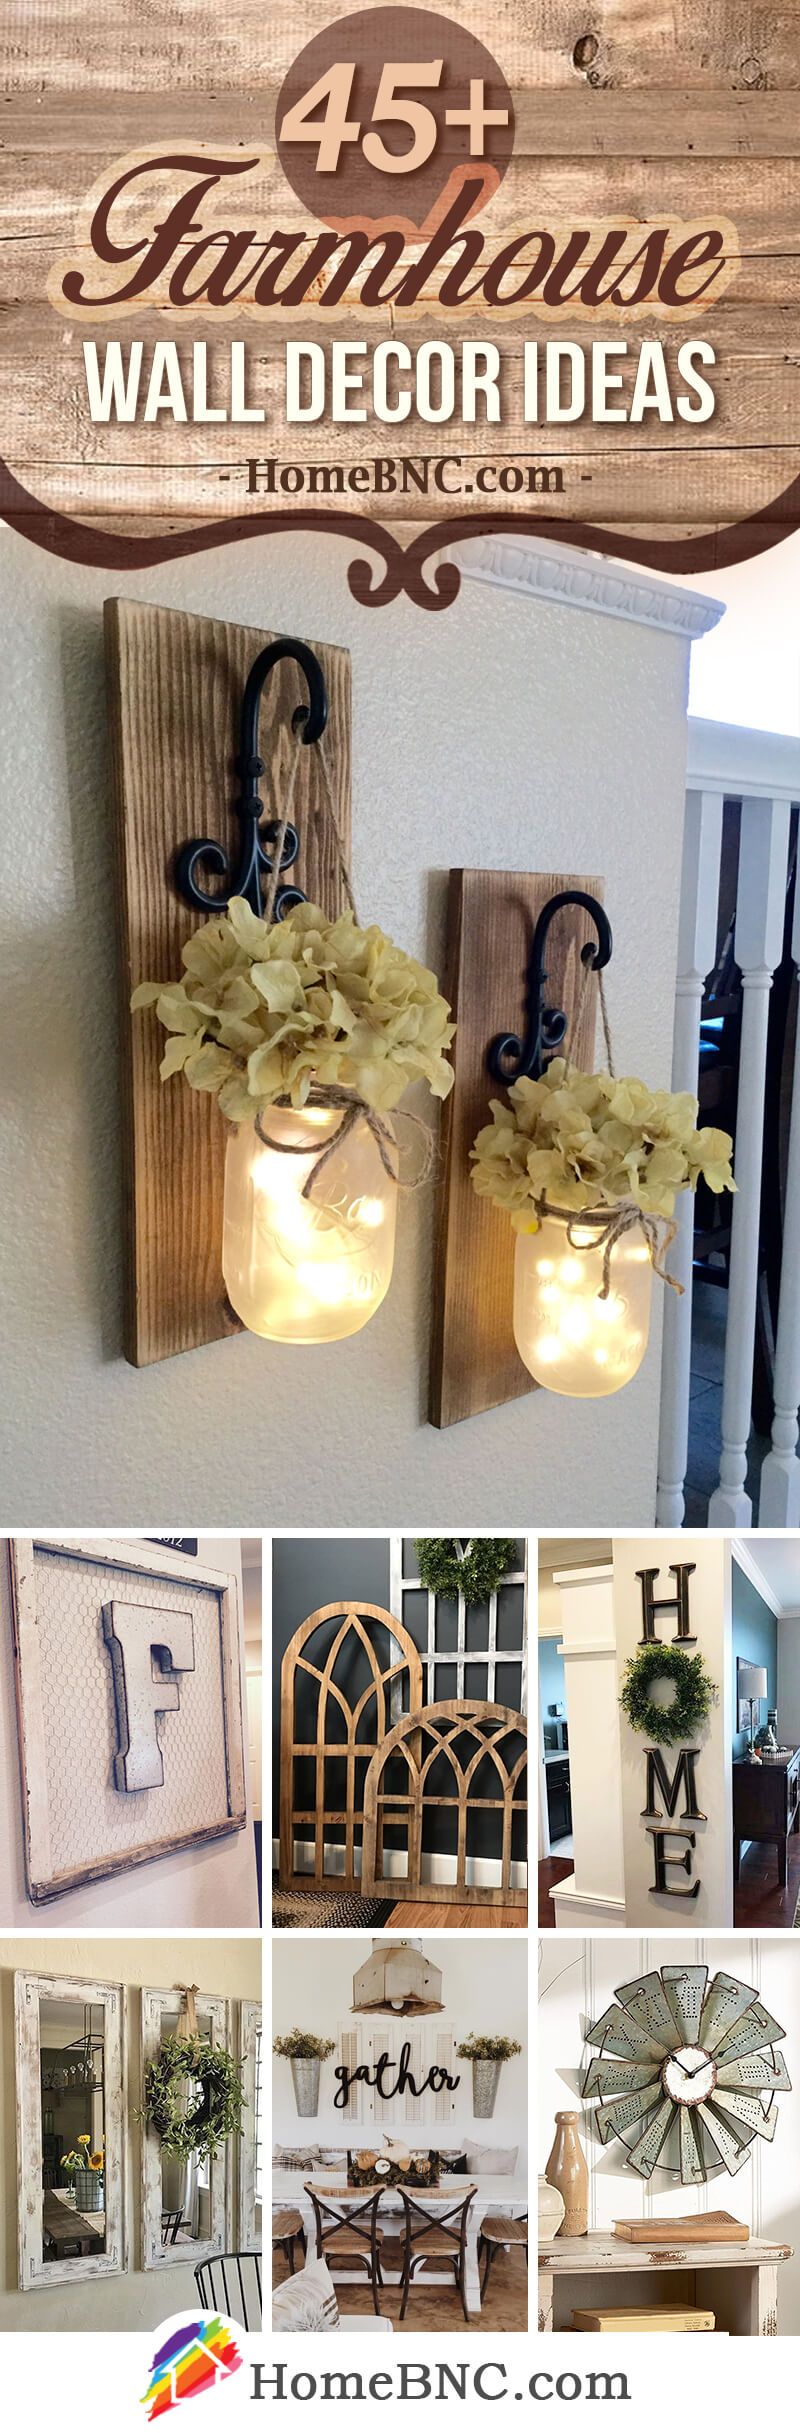 45+ Best Farmhouse Wall Decor Ideas And Designs For 2019 For Farm Metal Wall Rack And 3 Tin Pot With Hanger Wall Decor (View 12 of 30)